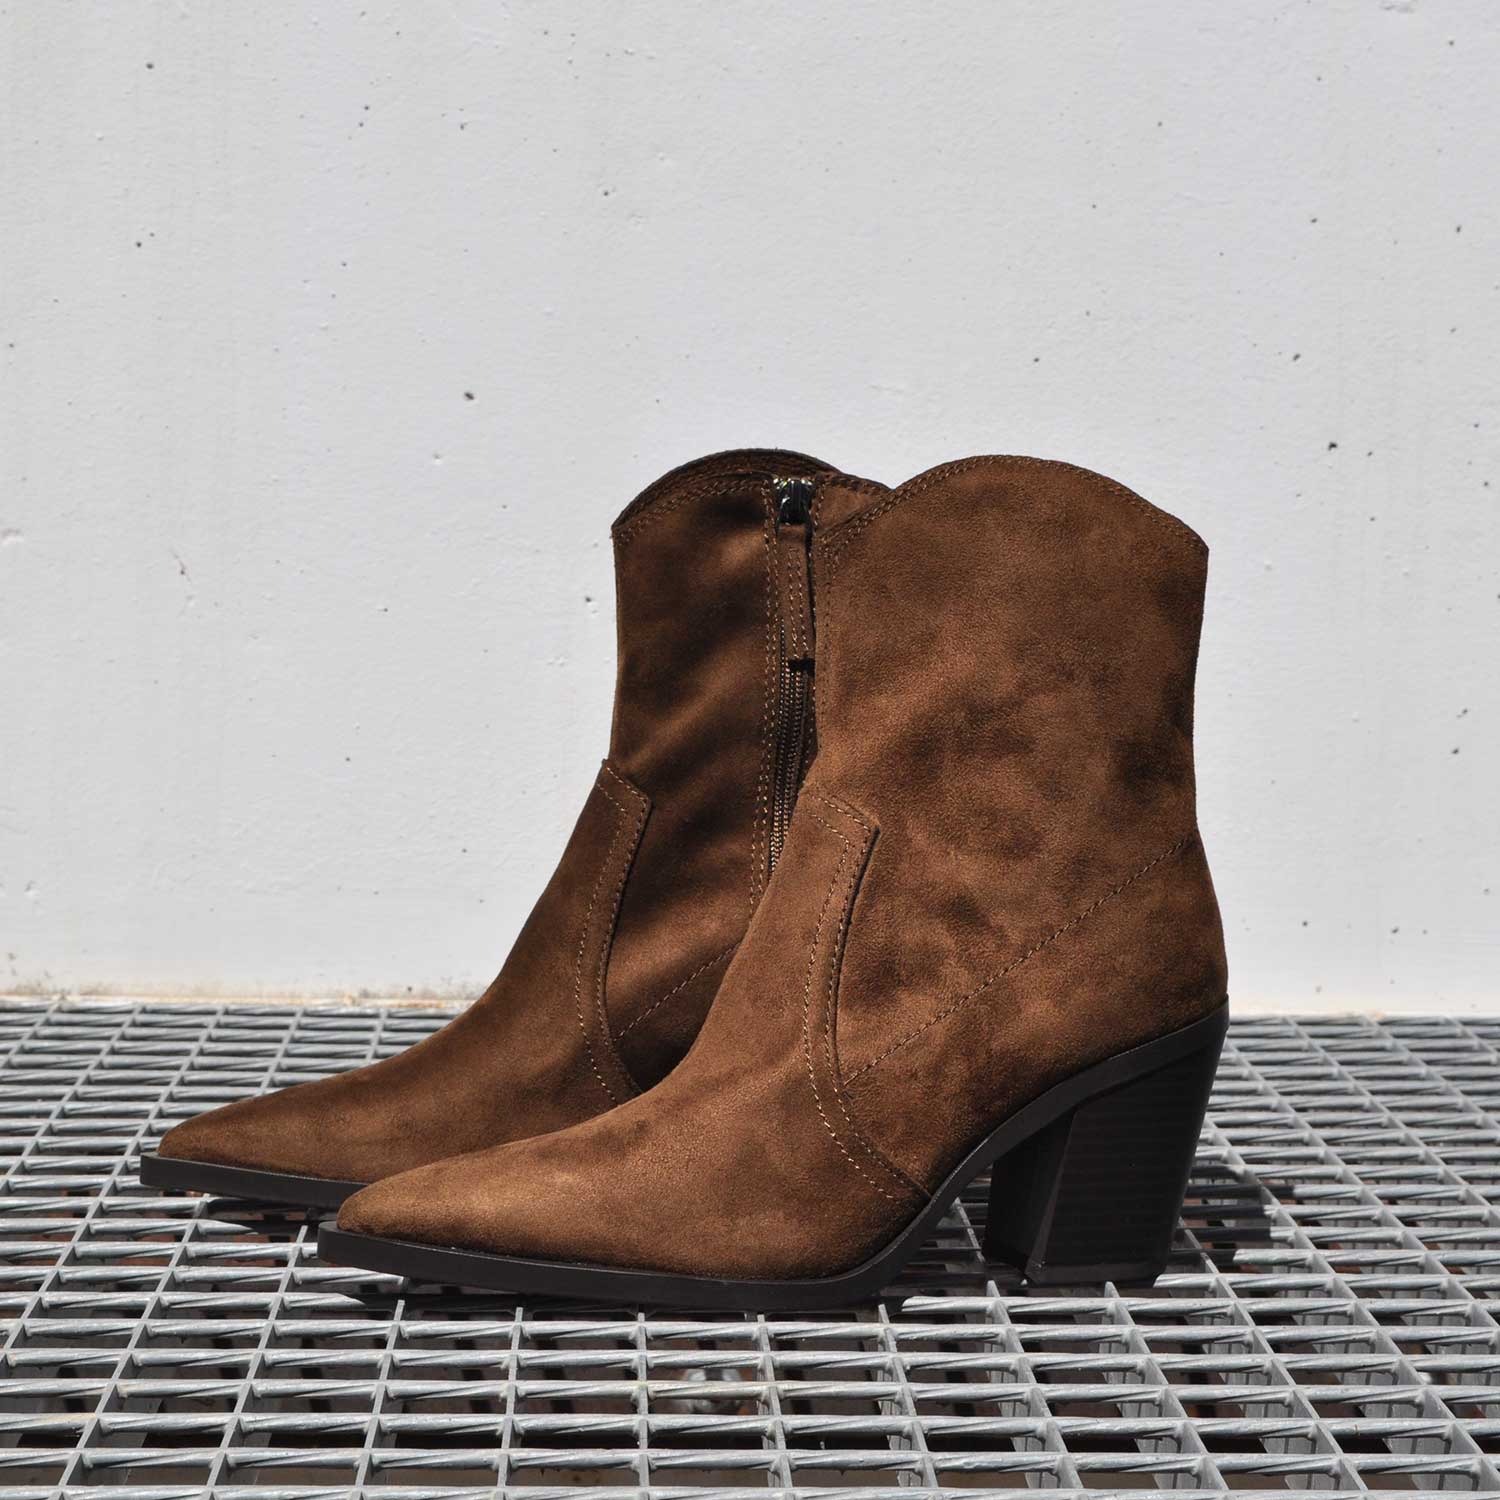 Brown square heel ankle boots